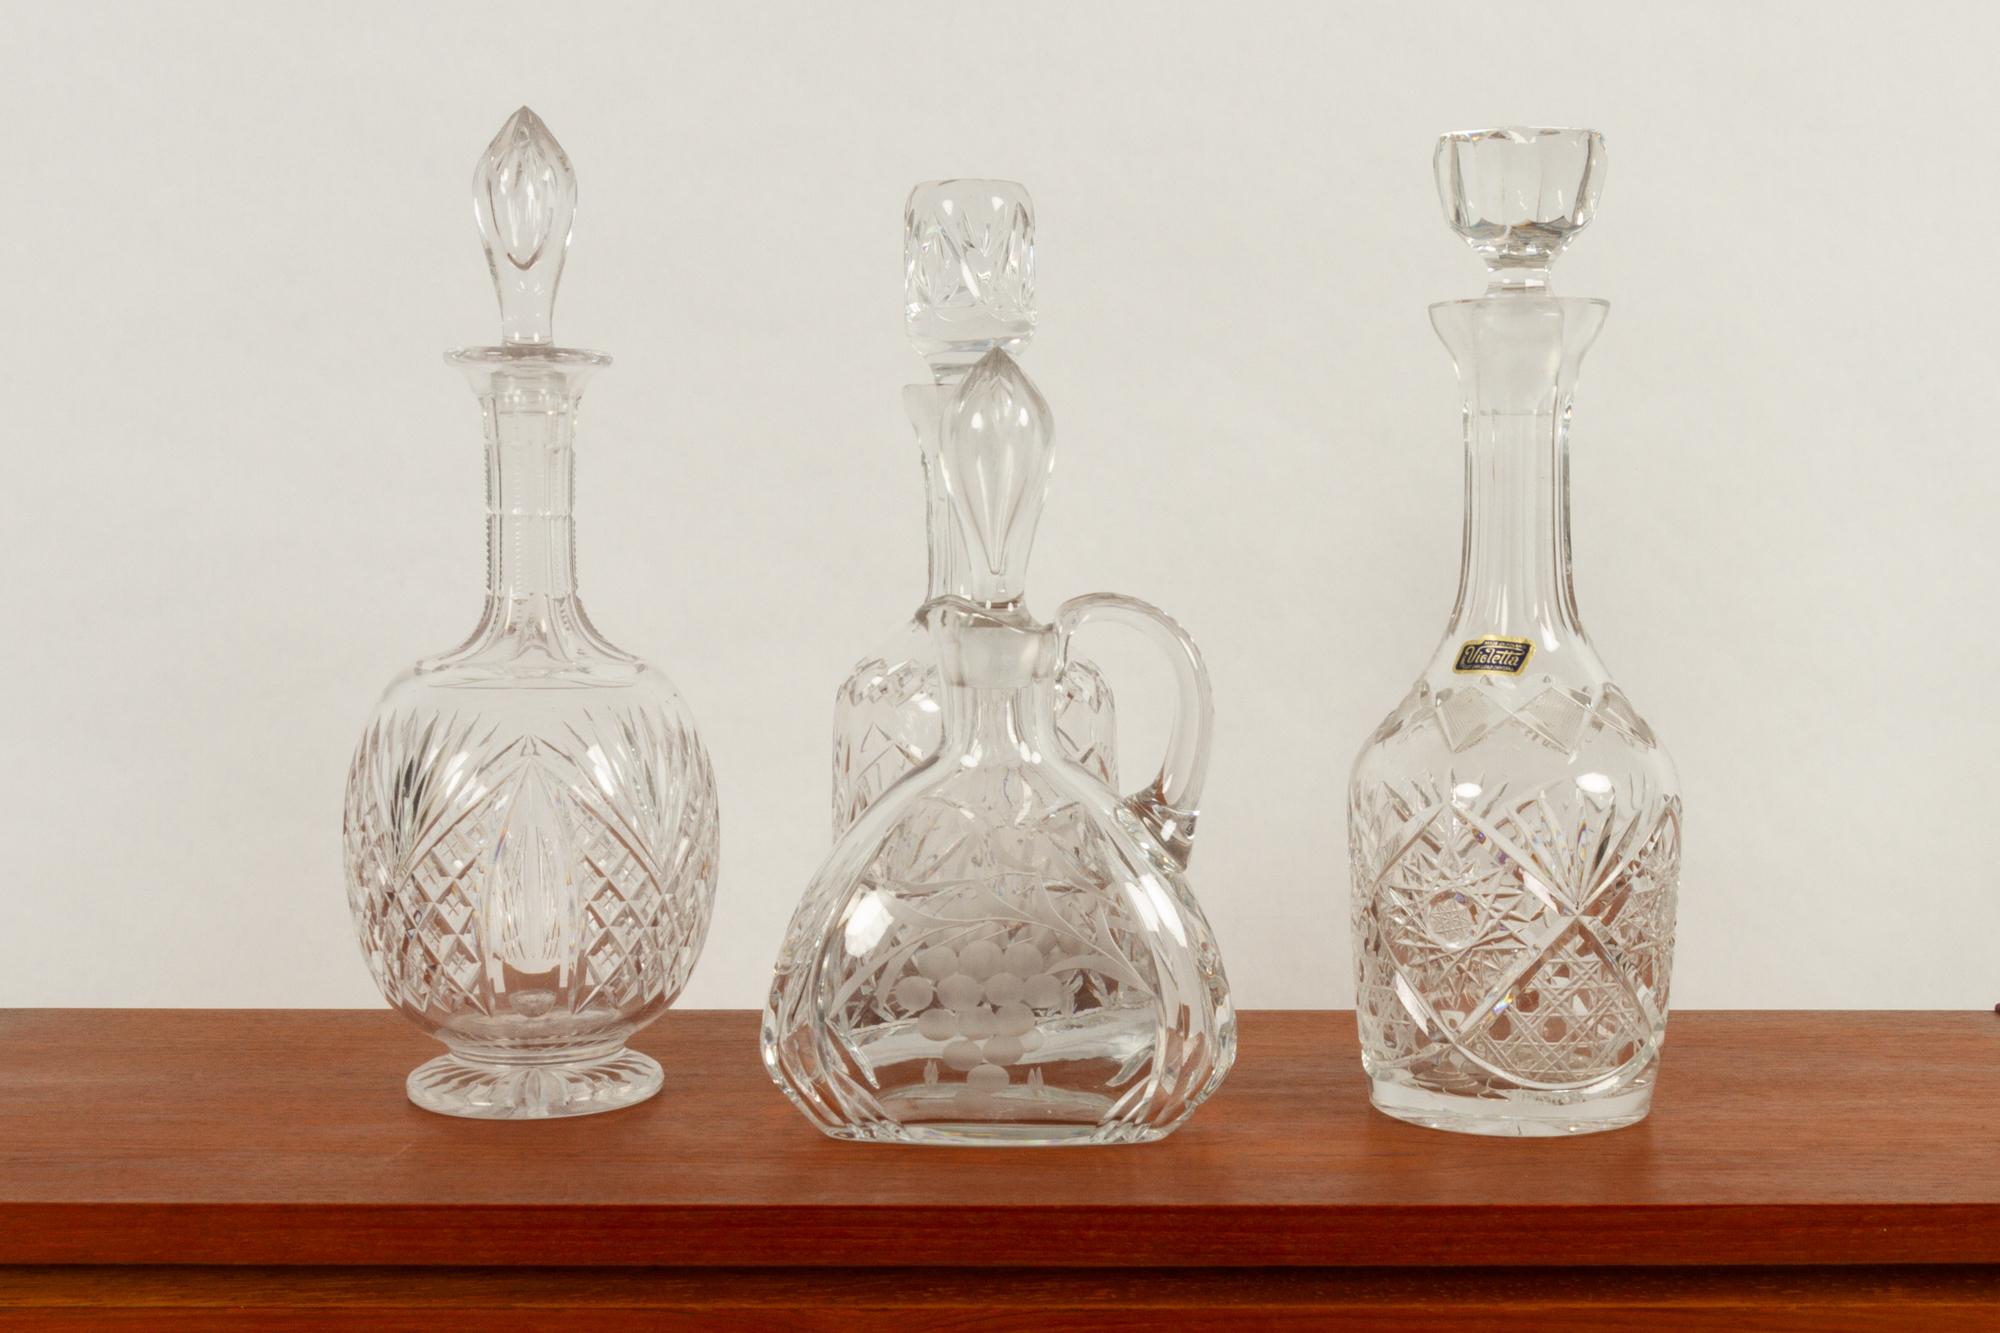 Bohemian Set of 4 Crystal Decanters, Mid-20th Century